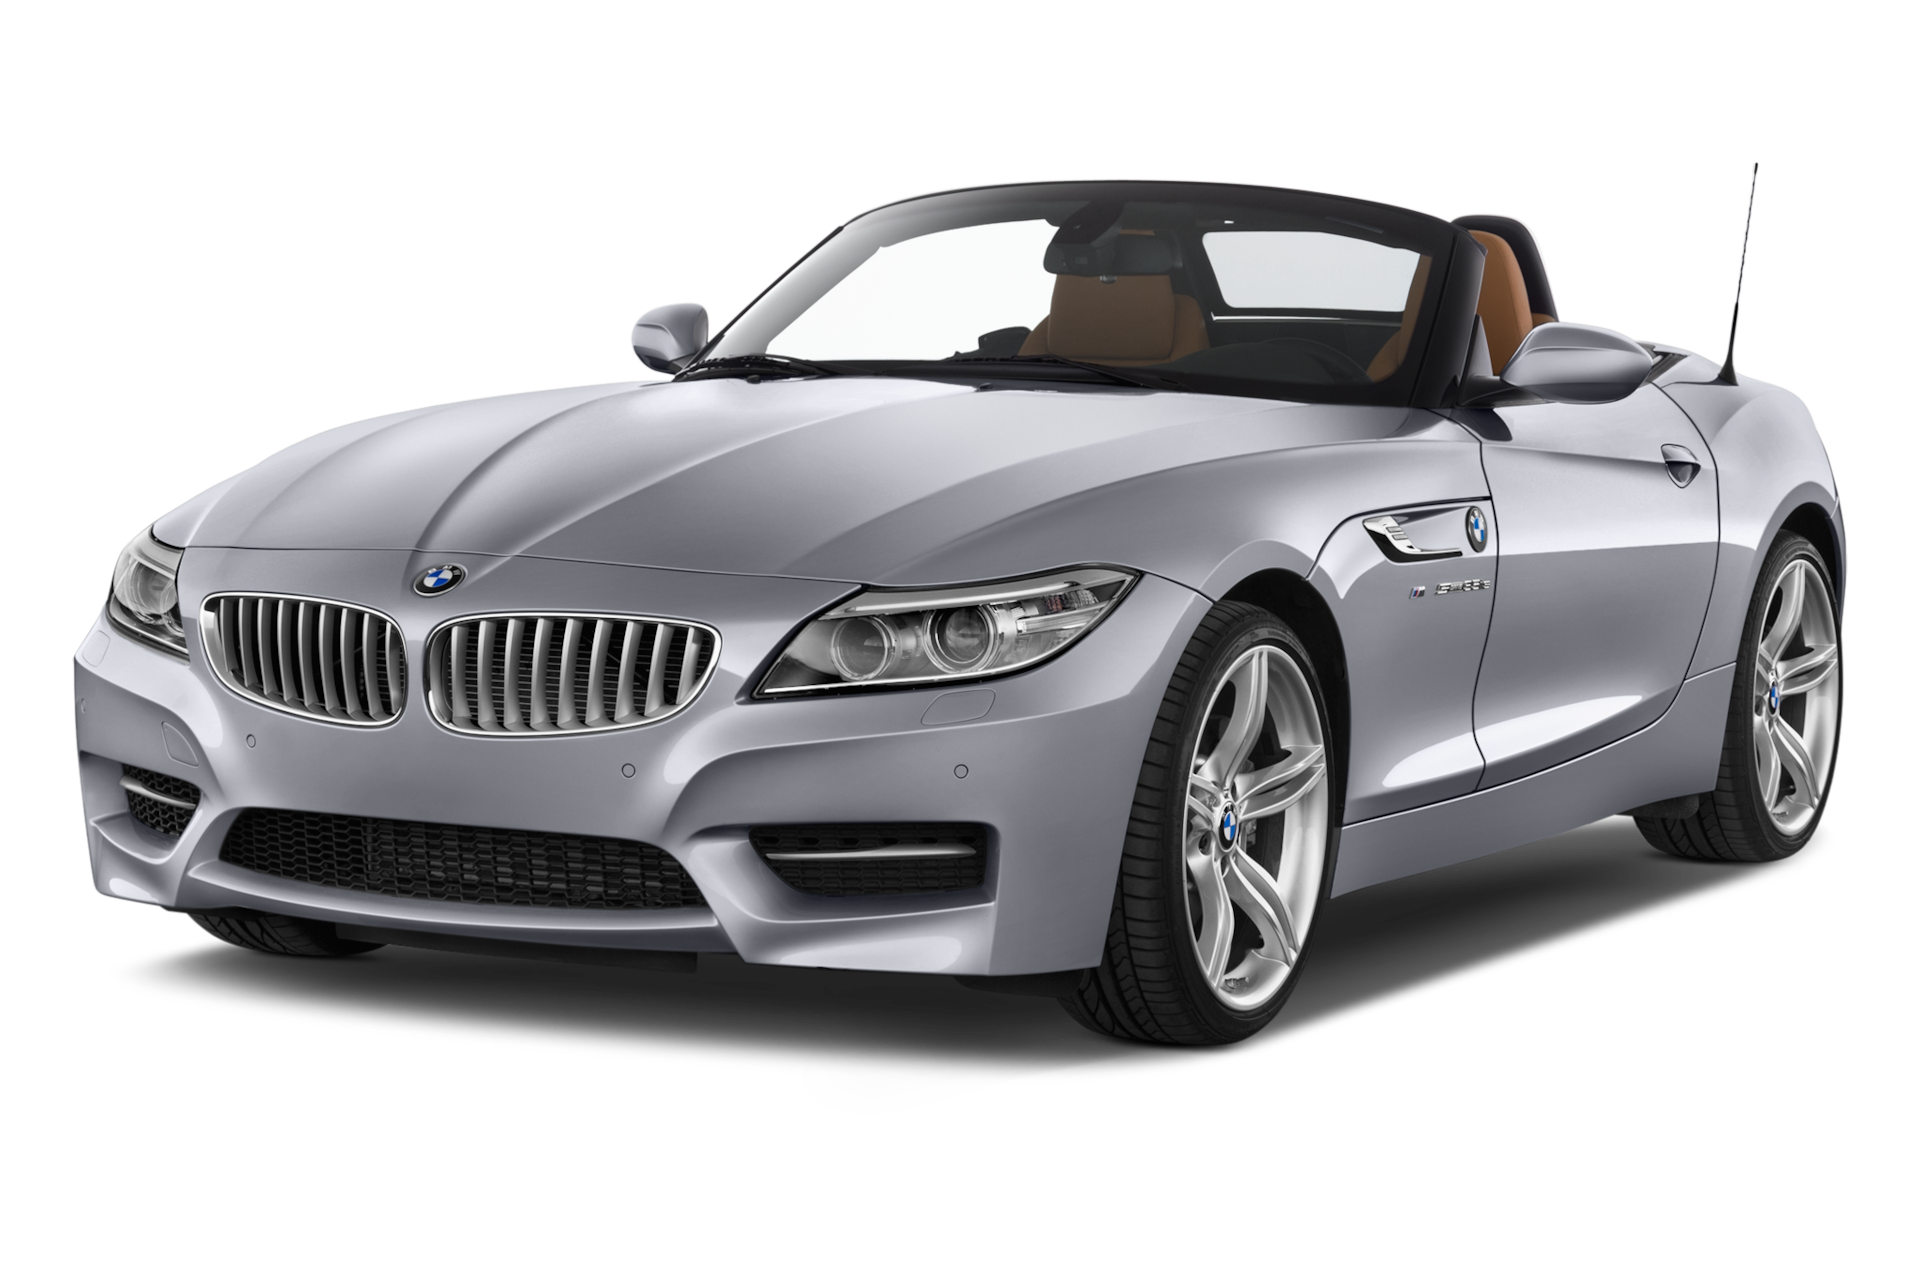 2014 BMW Z4 Prices, Reviews, and Photos - MotorTrend